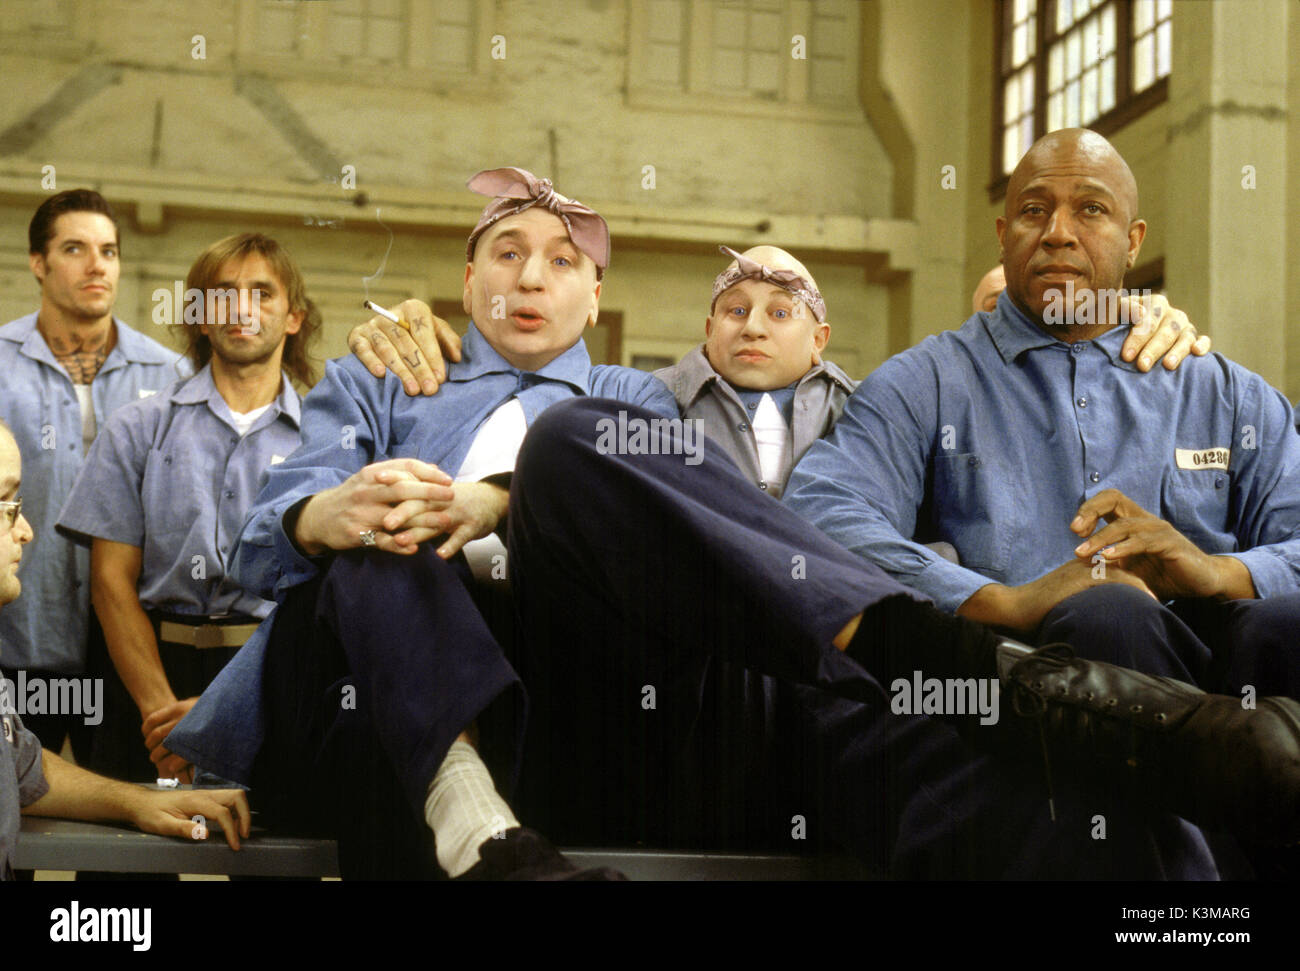 AUSTIN POWERS IN GOLDMEMBER [US 2002] MIKE MYERS [centre, as Dr Evil], VERNE TROYER, TOMMY 'TINY' LISTER     Date: 2002 Stock Photo